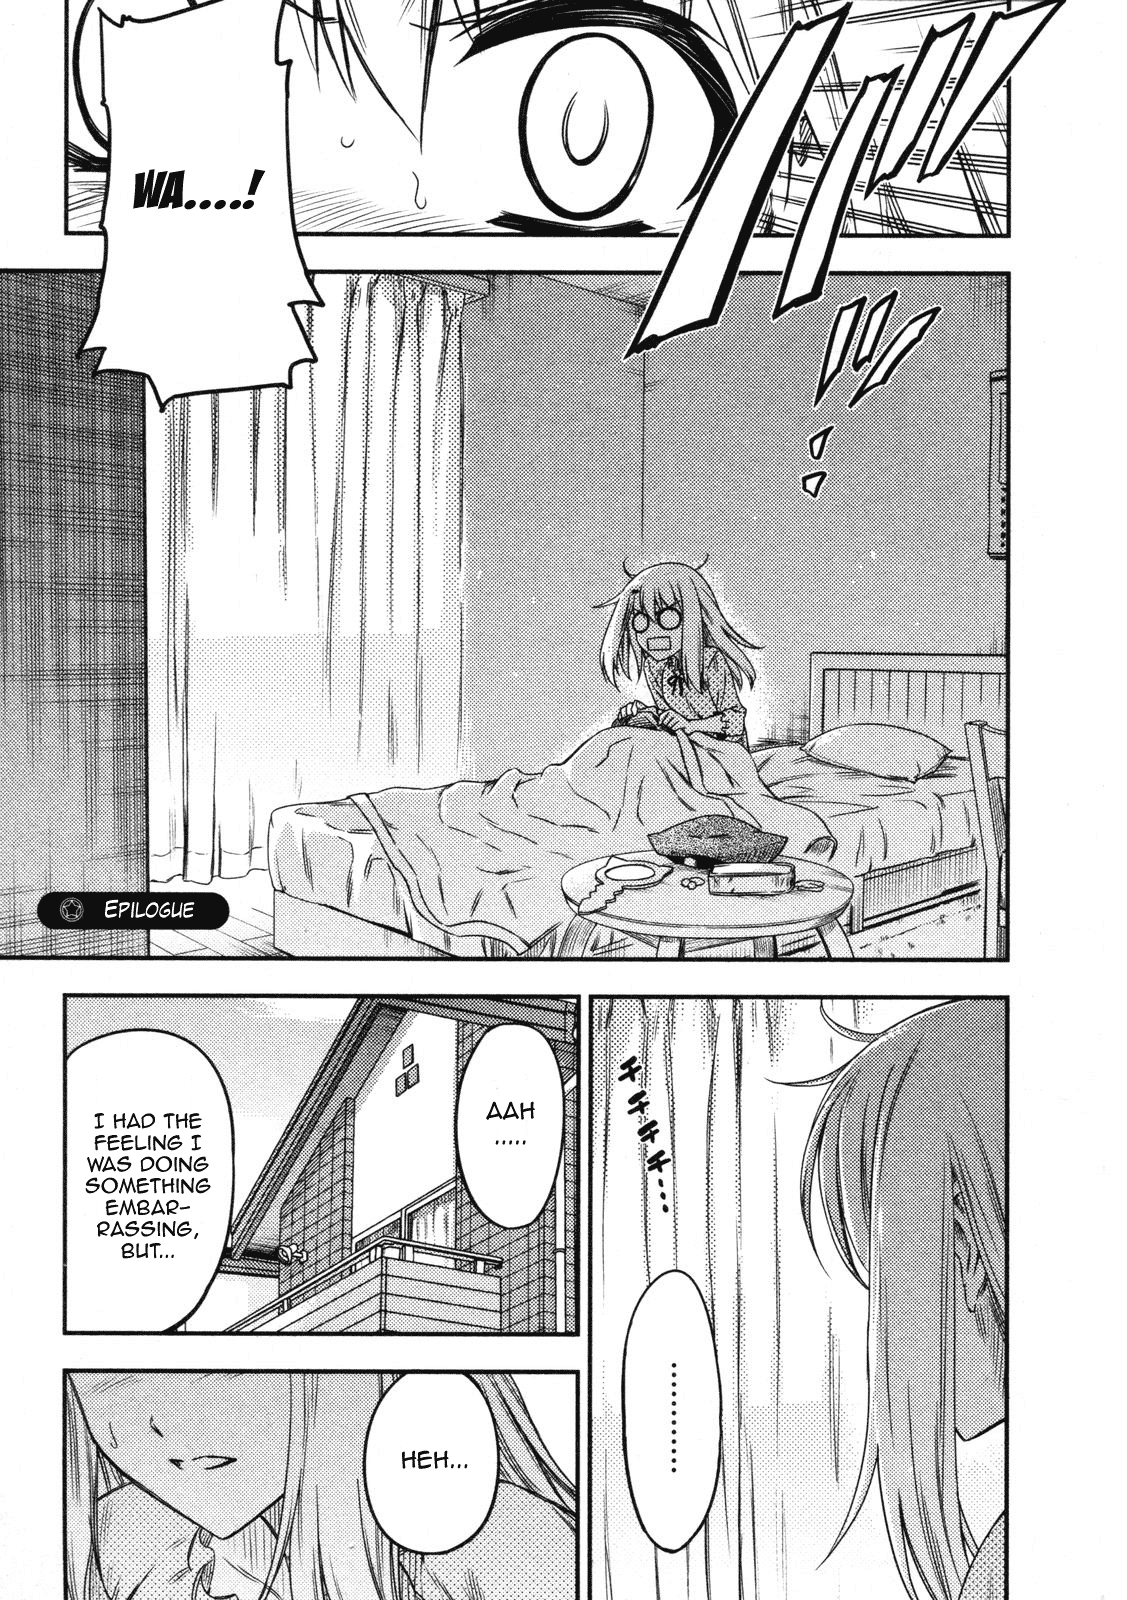 Fate/kaleid Liner Prisma☆Illya Vol.2 Chapter 13.5: Epilogue - Picture 1